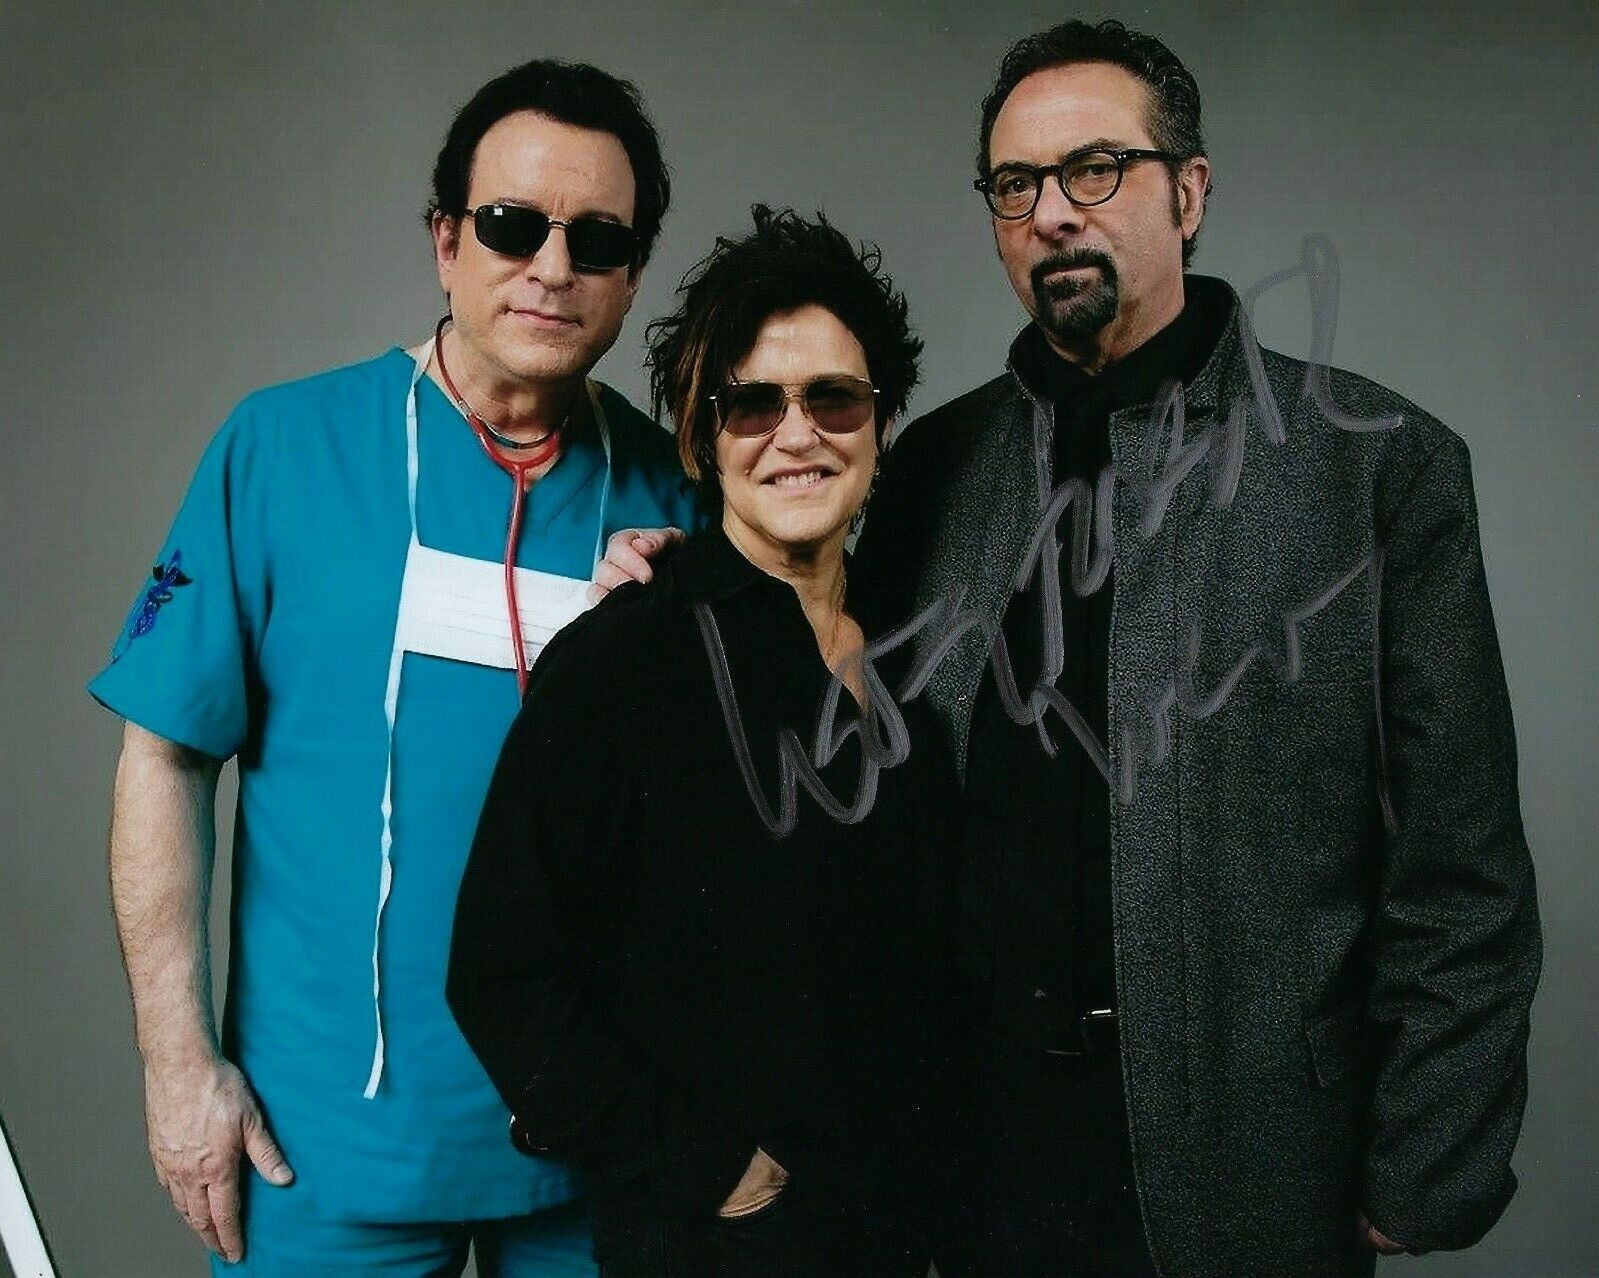 GFA Prince Revolution * WENDY MELVOIN * Signed 8x10 Photo Poster painting AD1 COA